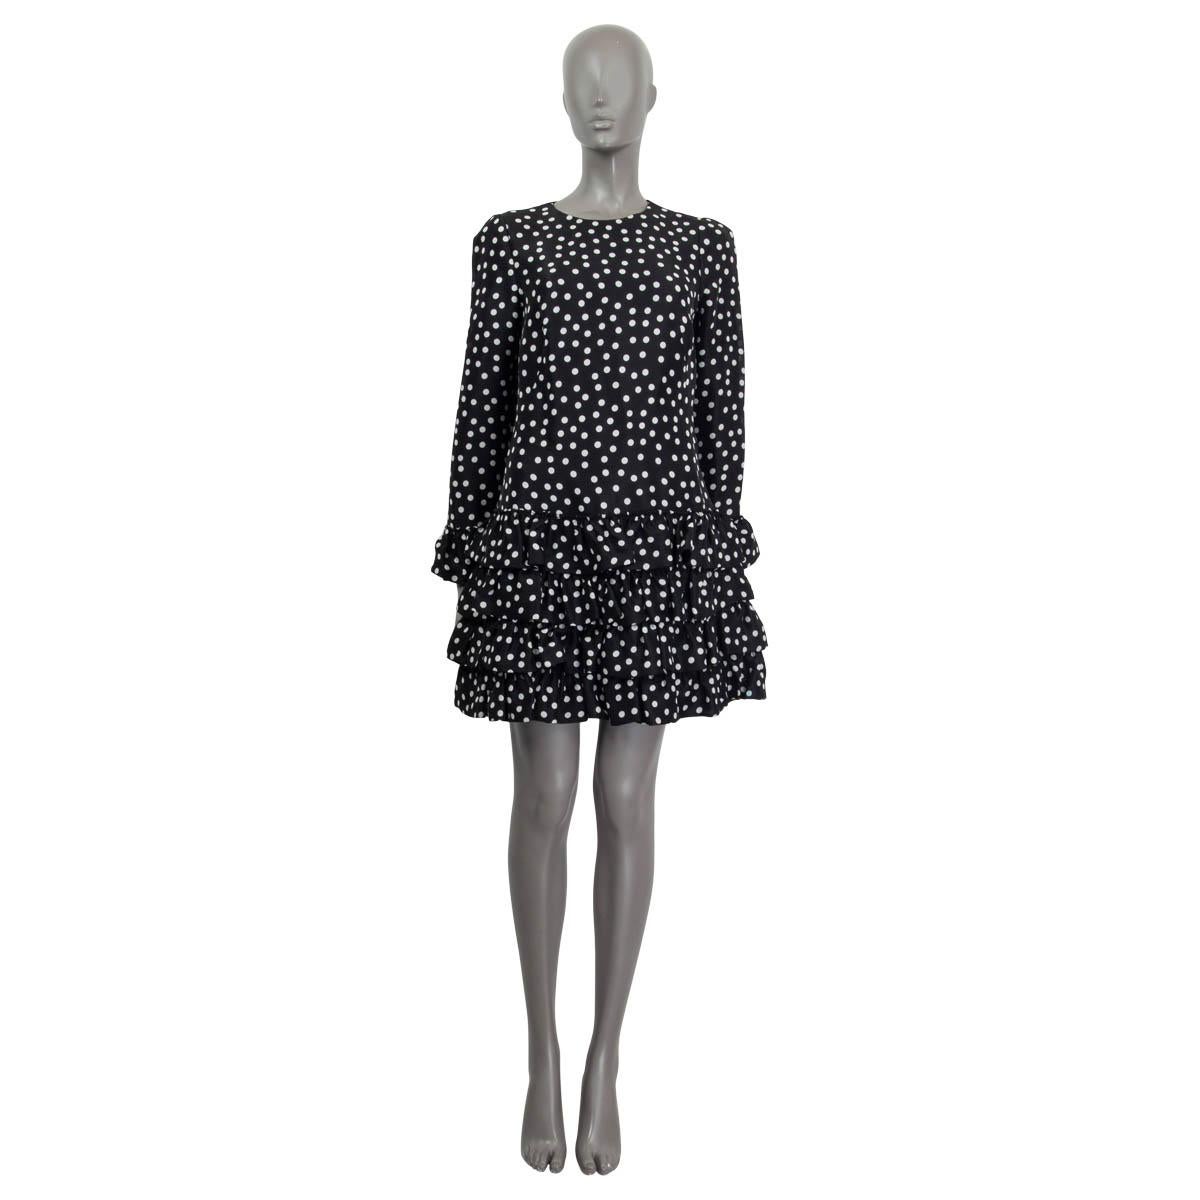 100% authentic Dolce & Gabbana ruffled polka-dot mini dress in black and white silk (100%). Has long sleeves and ruffled cuffs. Opens with a concealed zipper and a hook on the back. Lined in black silk (93%) and elastane (7%). Has been worn and is